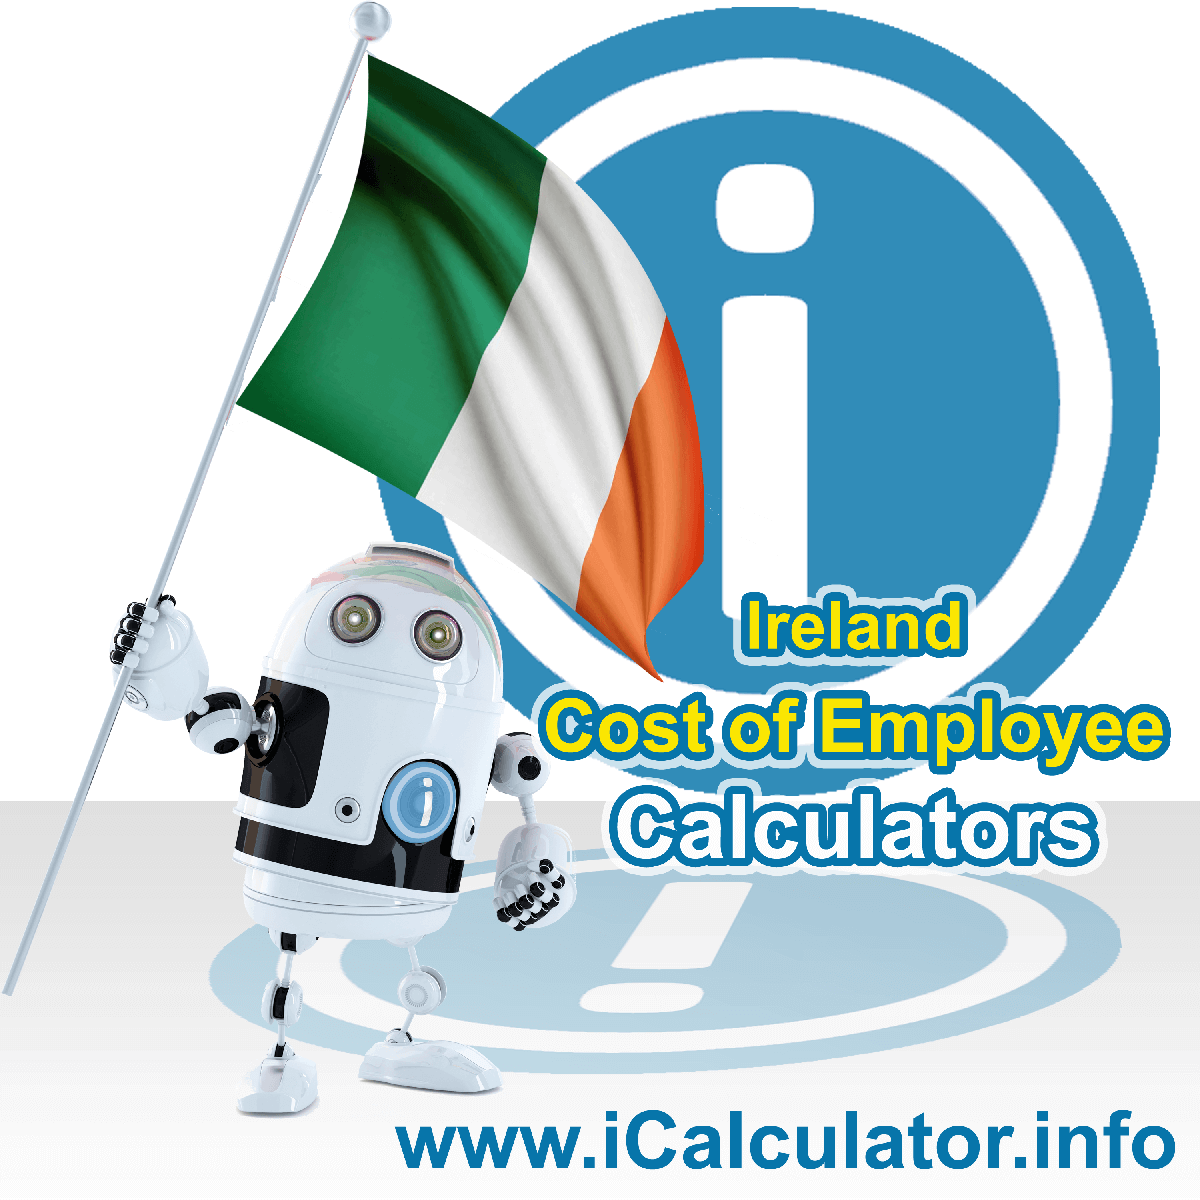 True Cost of an Employee in Ireland Calculator. This image shows a new employer in Ireland looking hiring a new employee, they calculate the cost of hiring an employee in Ireland using the True Cost of an Employee in Ireland calculator to understand their employment cost in Ireland in 2023